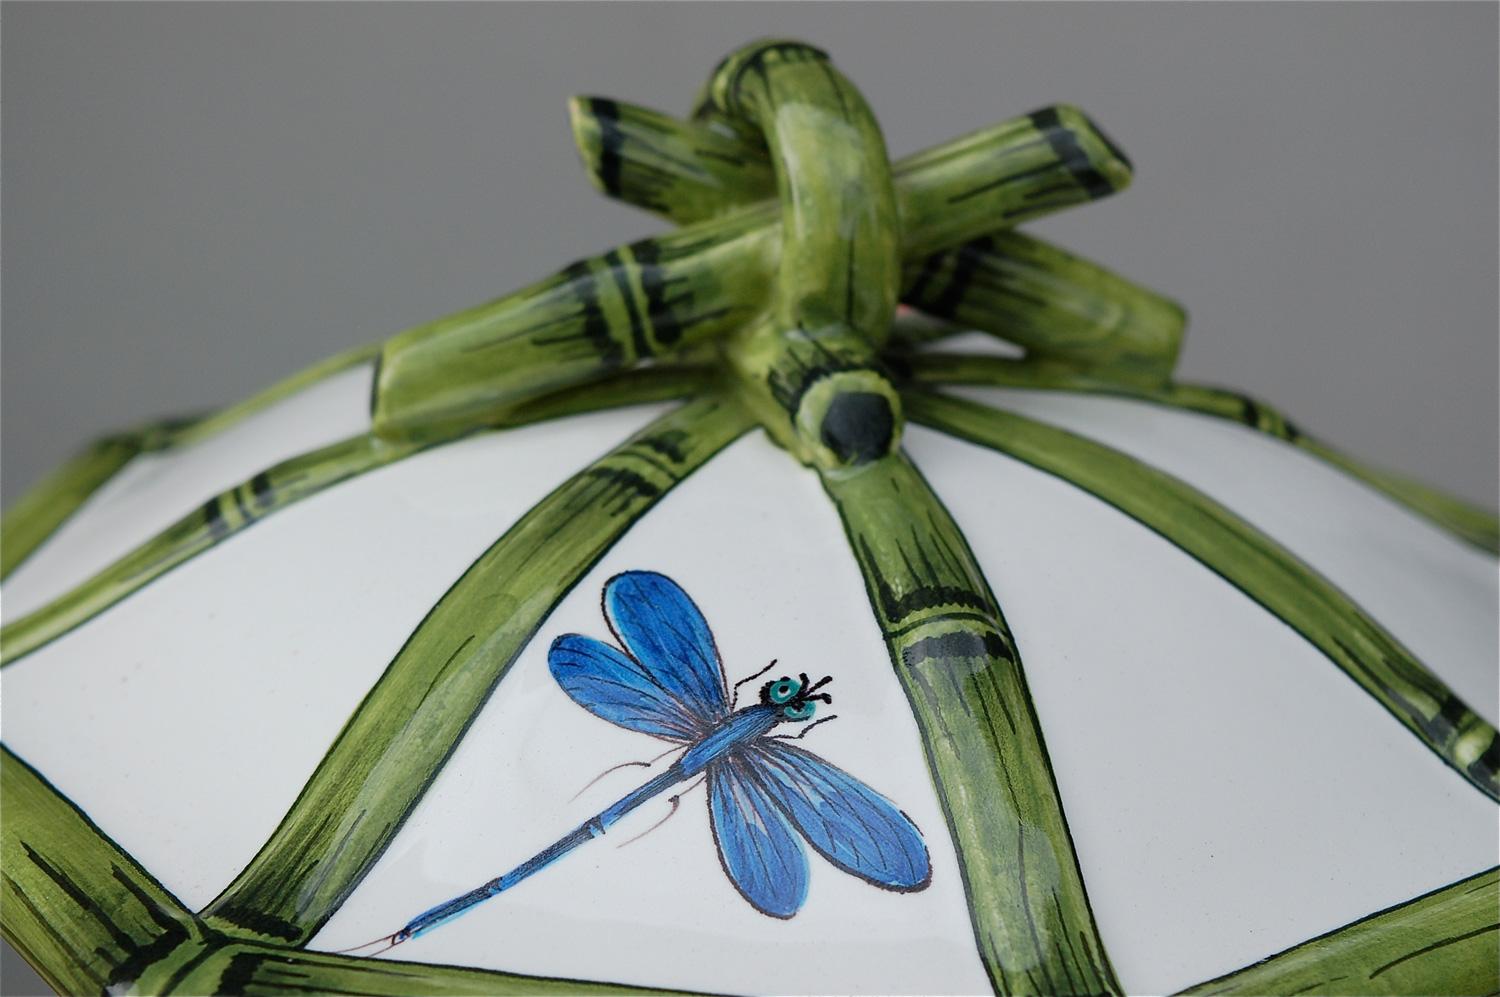 Hand-Painted Vintage COSTA Serving Bowl with Bamboo and Dragonfly Decoration, 1970s Italy For Sale